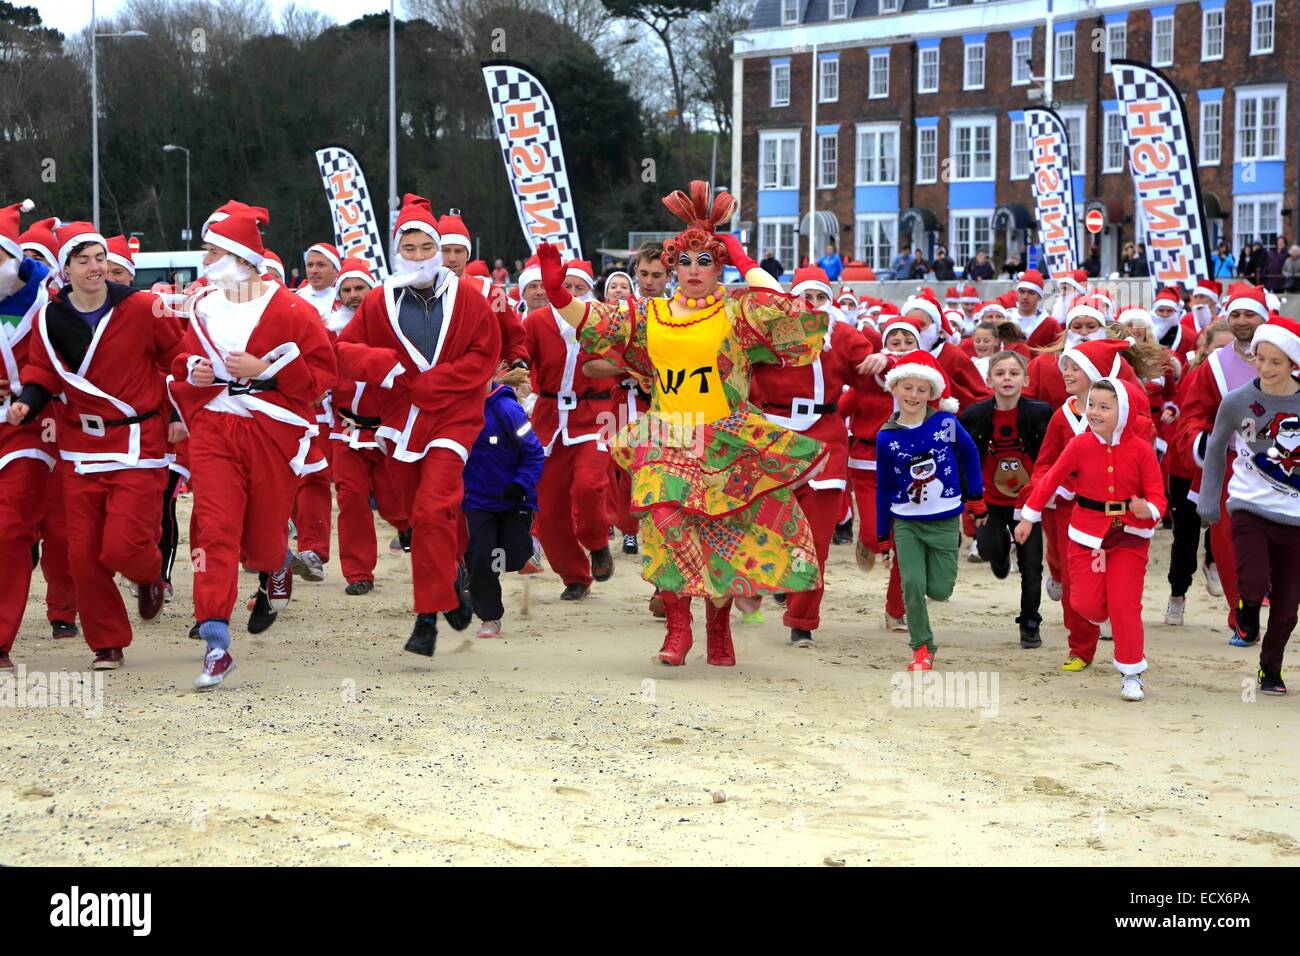 Weymouth, Dorset, UK. 21st Dec 2014. Hundreds of Santas gather at Weymouth for the annual Chase the Christmas Pudding race which takes place on a 5km route along Weymouth's famous beach. Credit:  Tom Corban/Alamy Live News Stock Photo